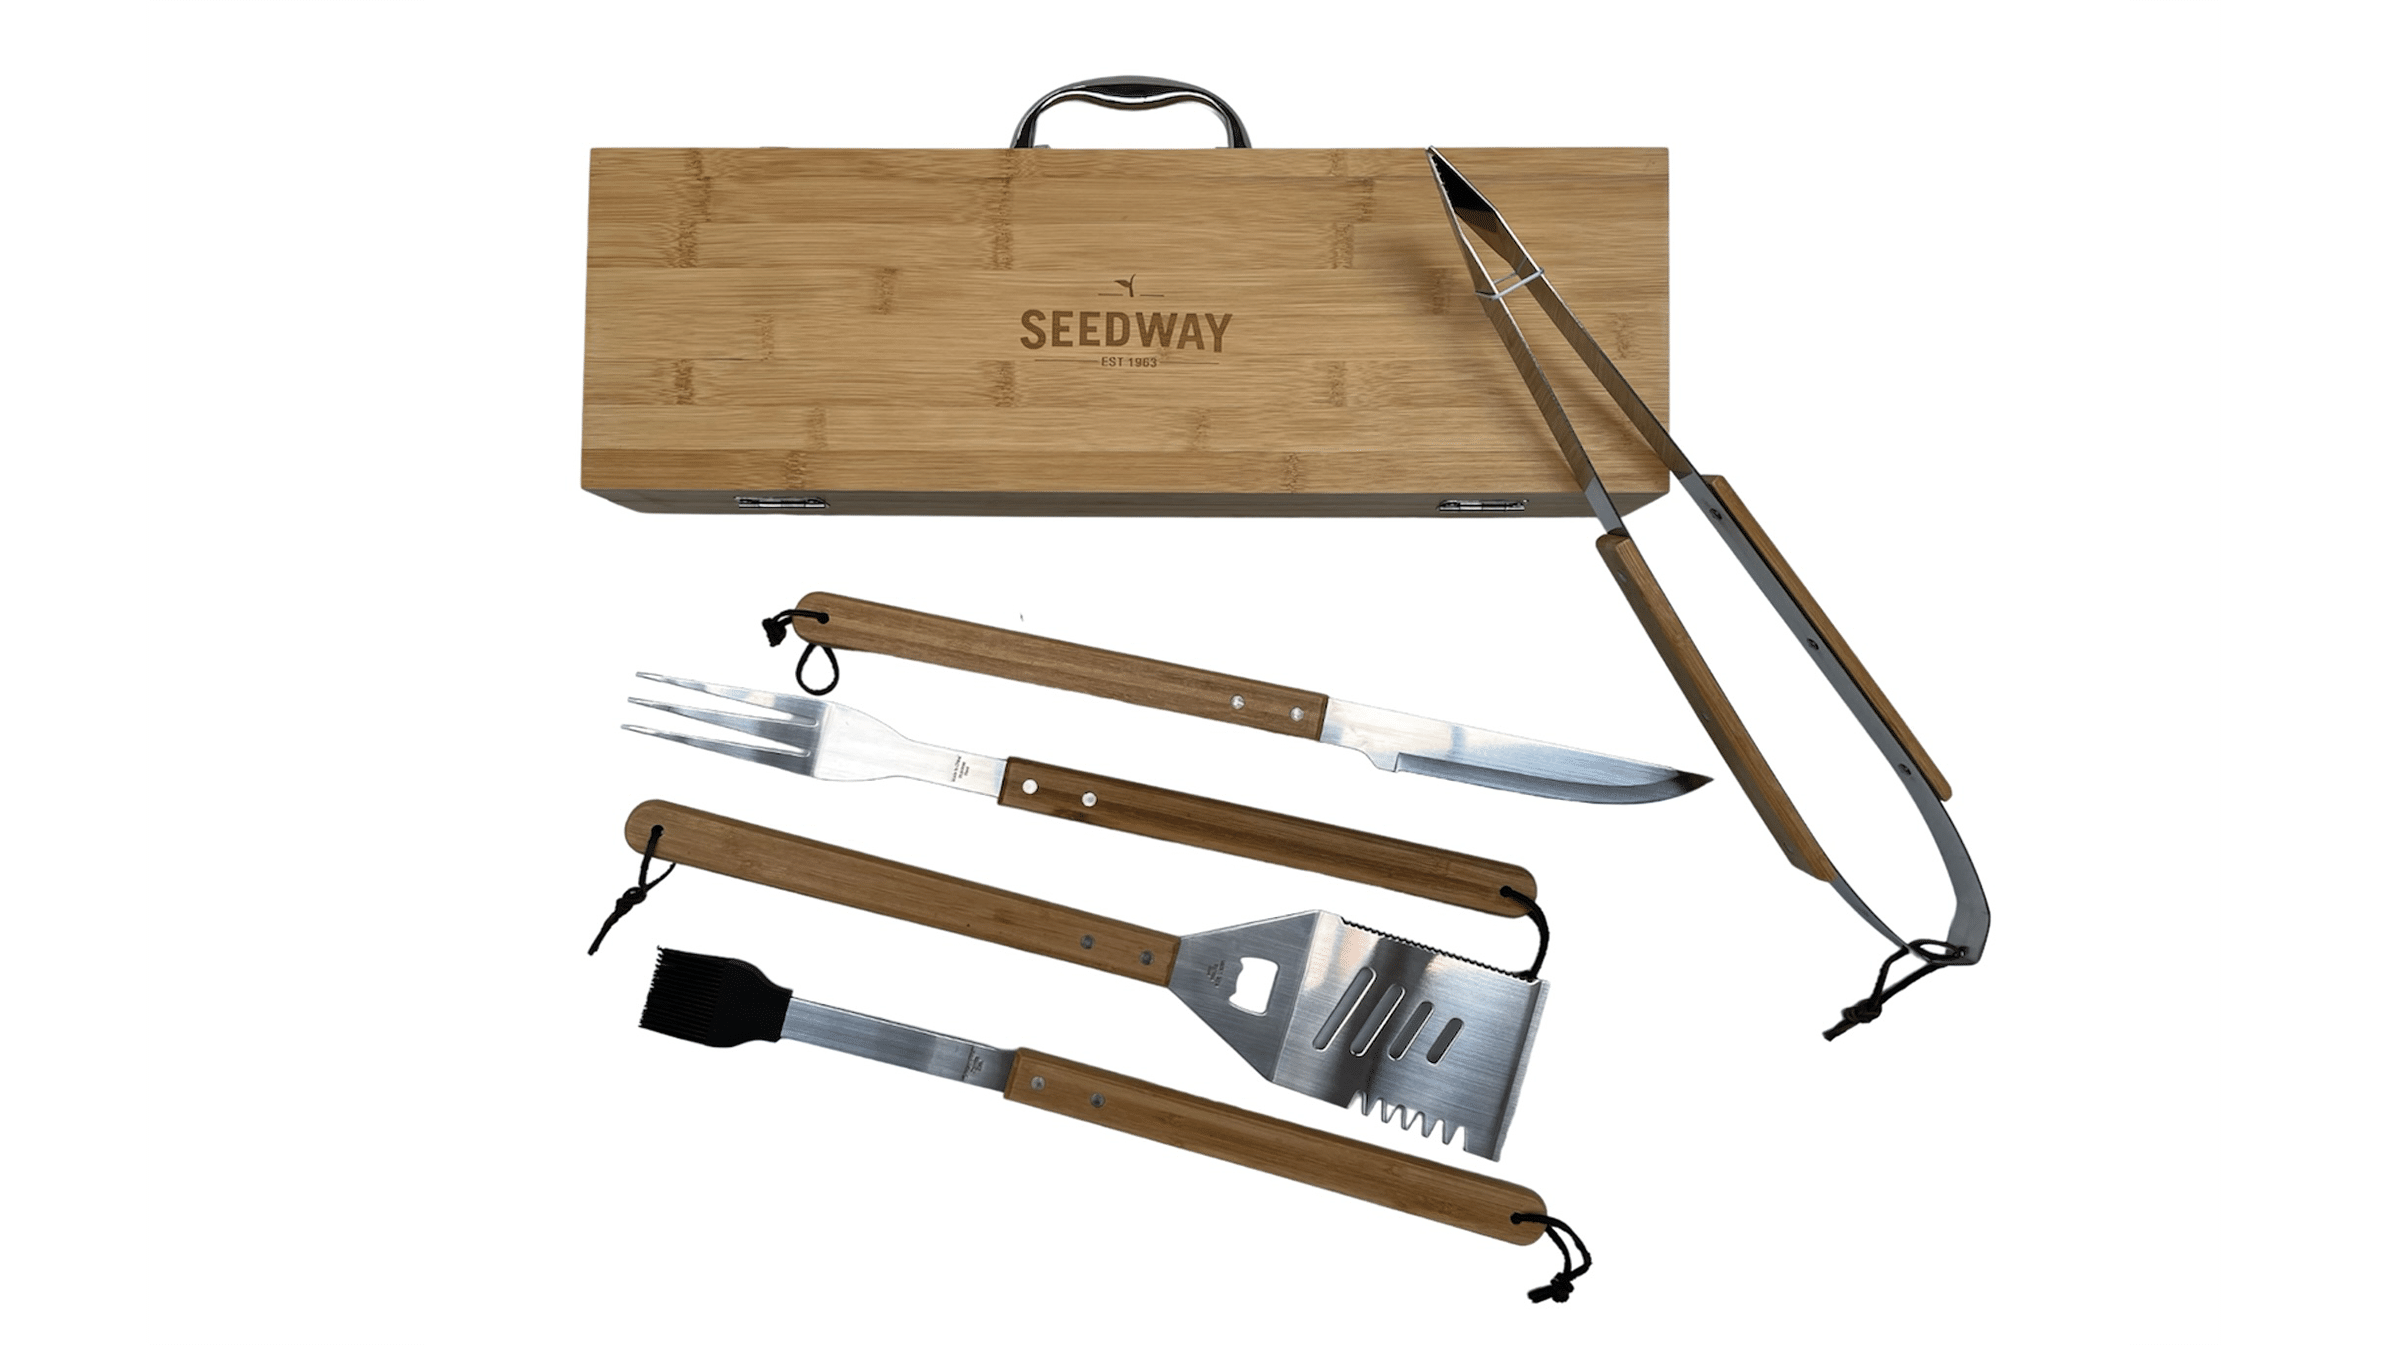 SEEDWAY BBQ Set With Bamboo Carry Case | Seedway